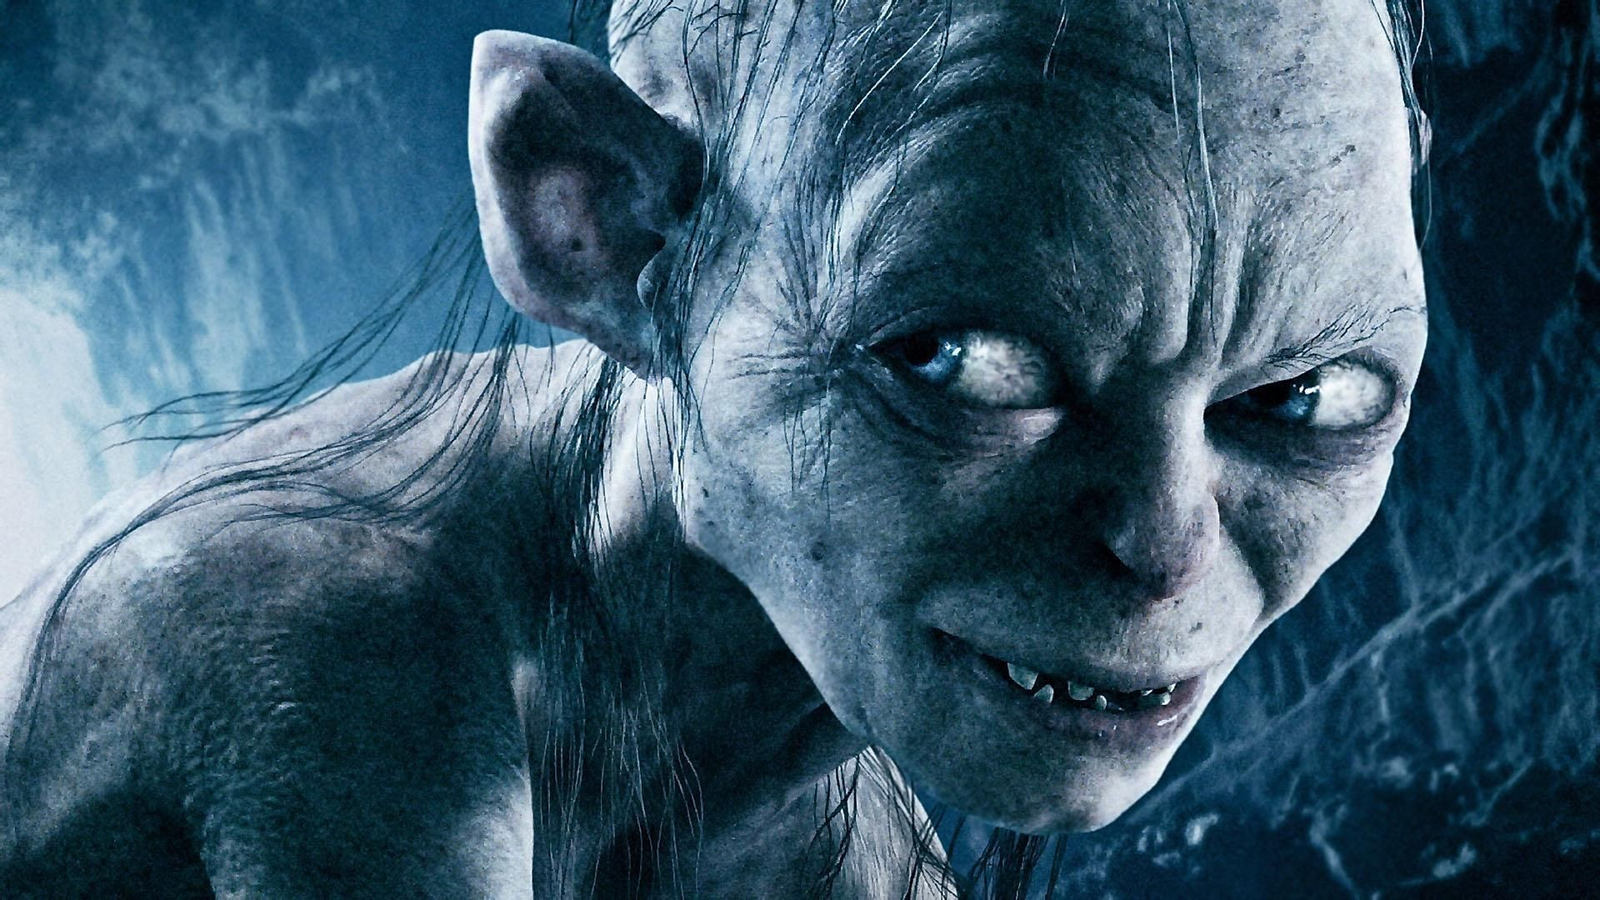 The Lord of the Rings: Gollum game trailer officially revealed